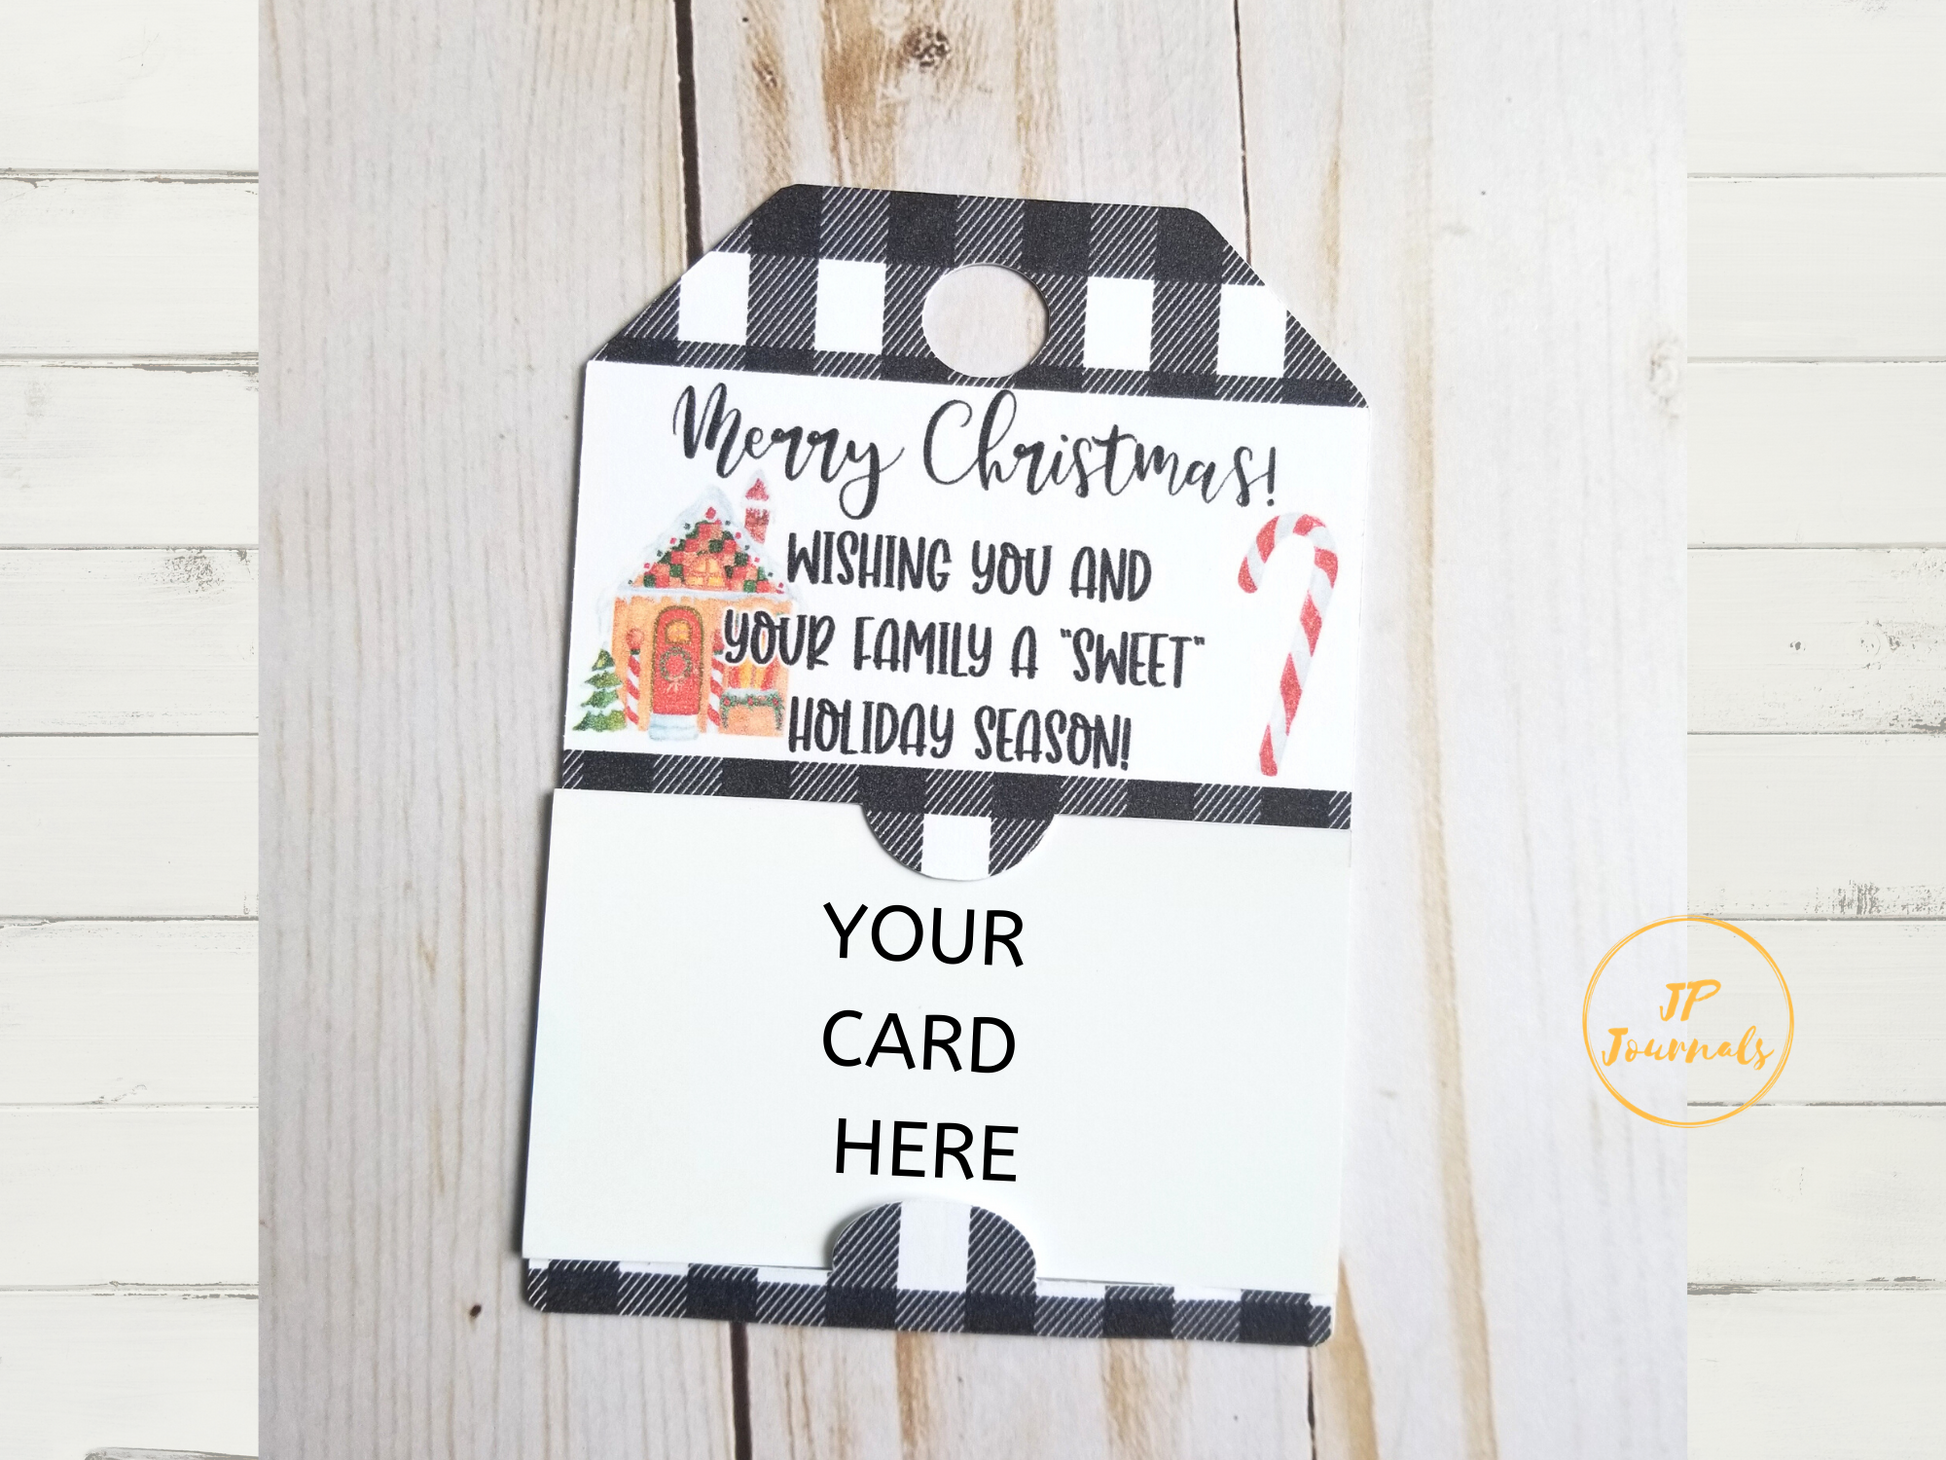 Business Marketing Hang Tags, Business Card Holder Christmas Tags for Marketing and Client Gifts, Real Estate Agent Broker Sales